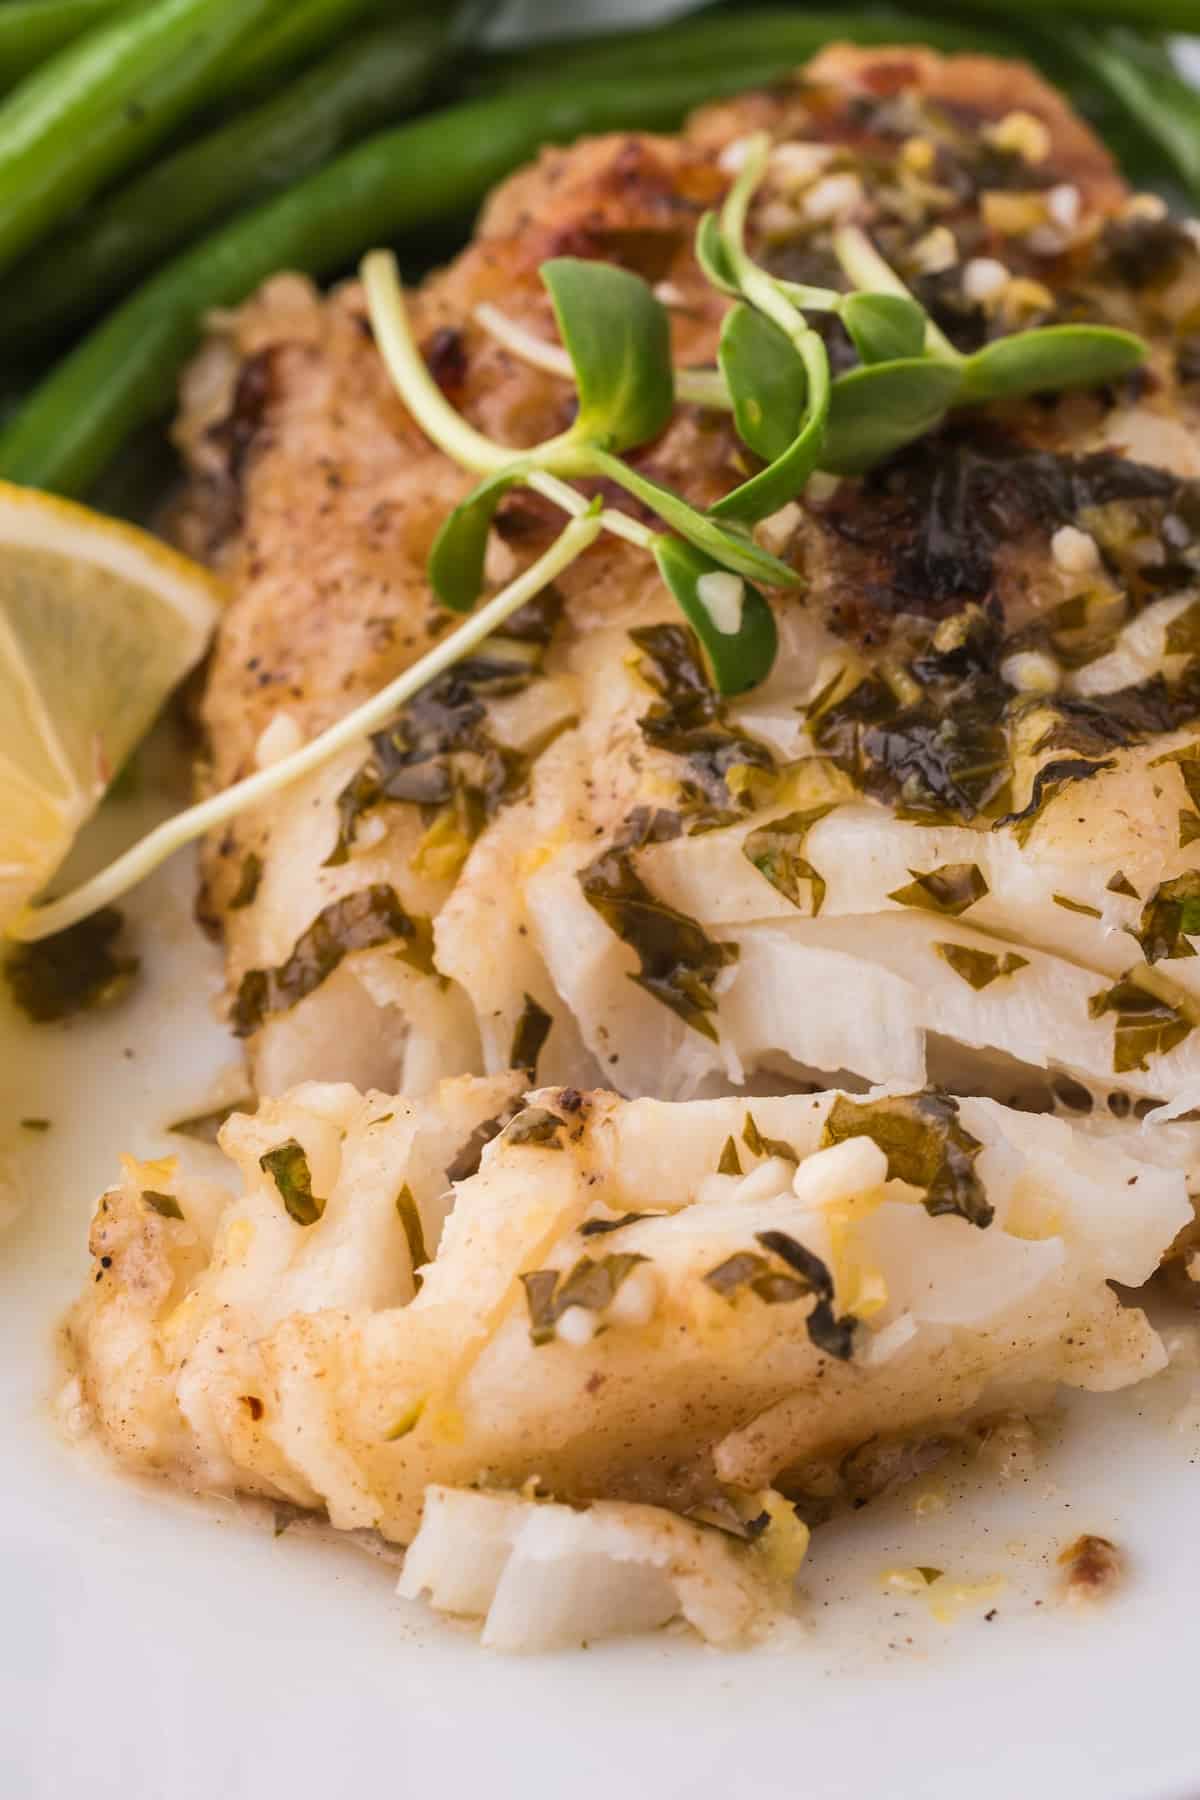 Pan fried cod fillet with lemon and herbs on a white plate.